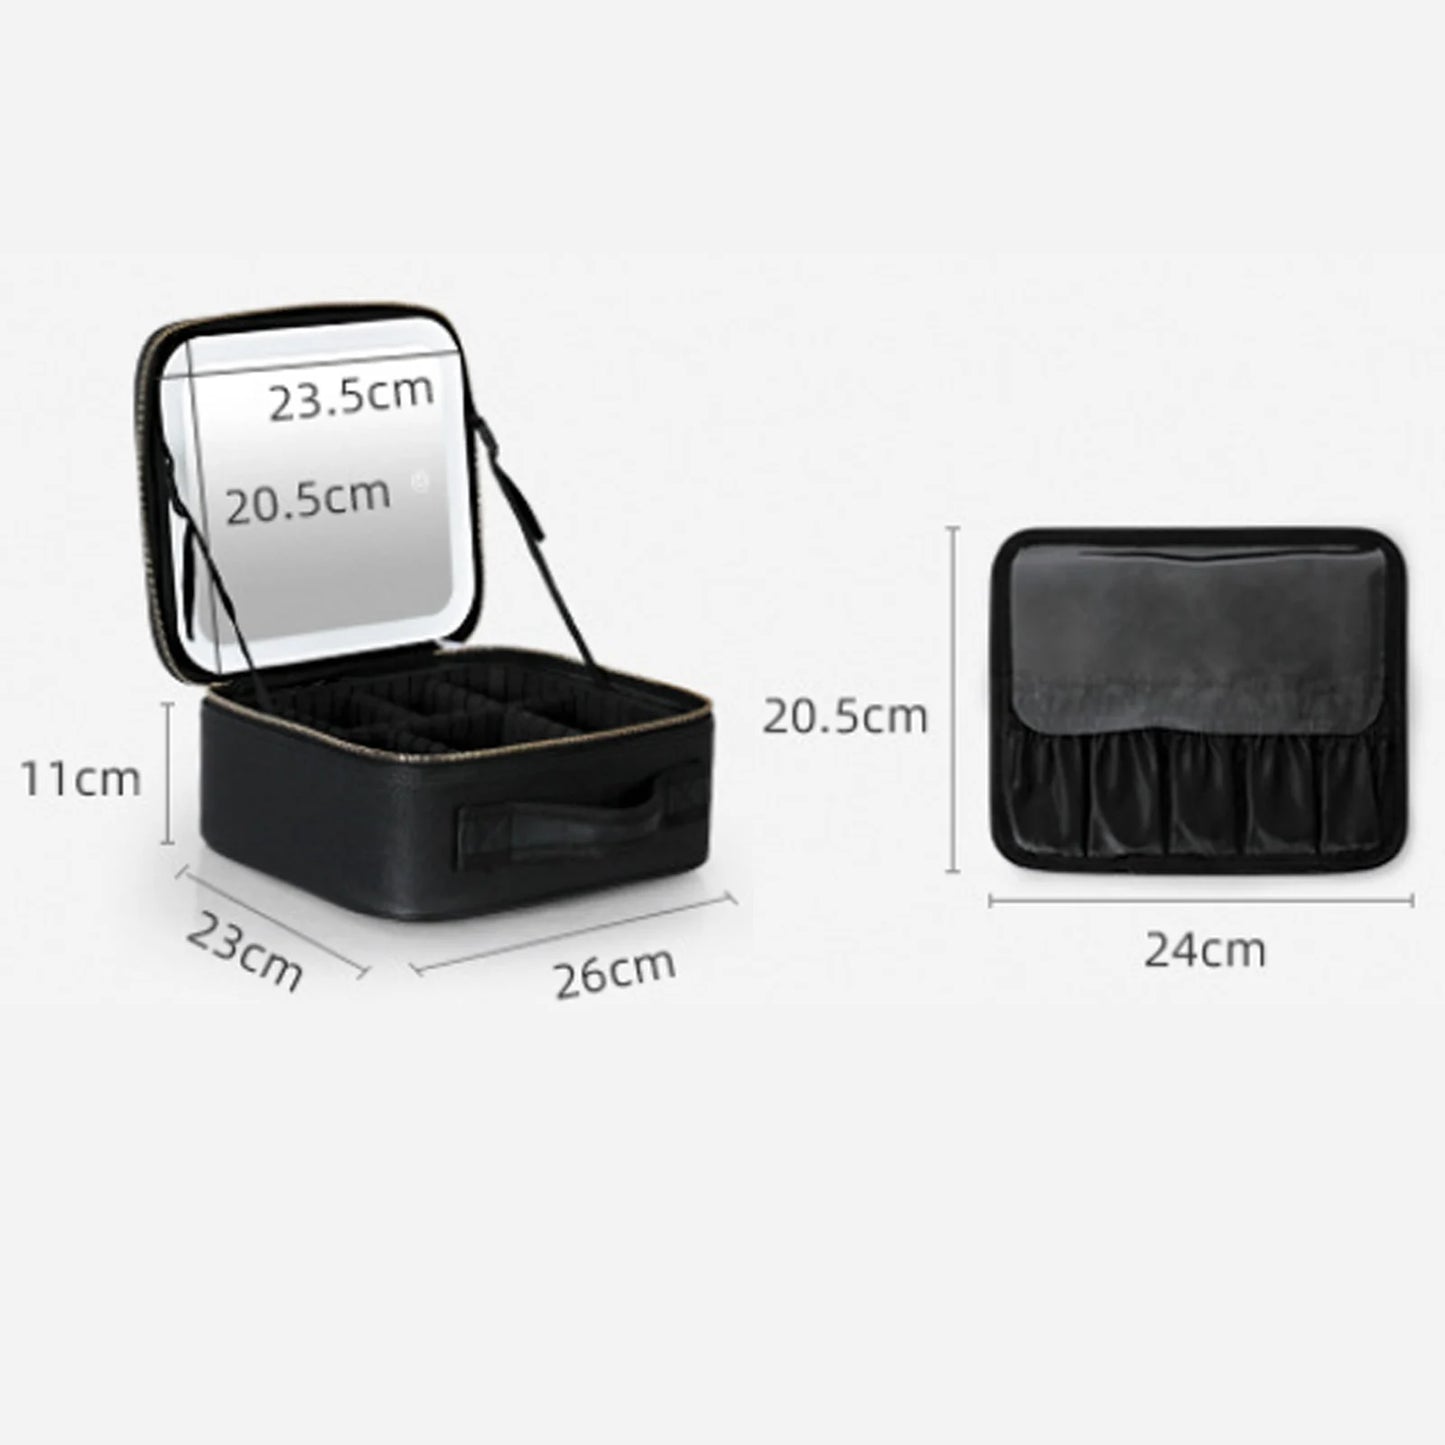 Smart LED Cosmetic Case: Fashionable Makeup Bag with Mirror for Travel